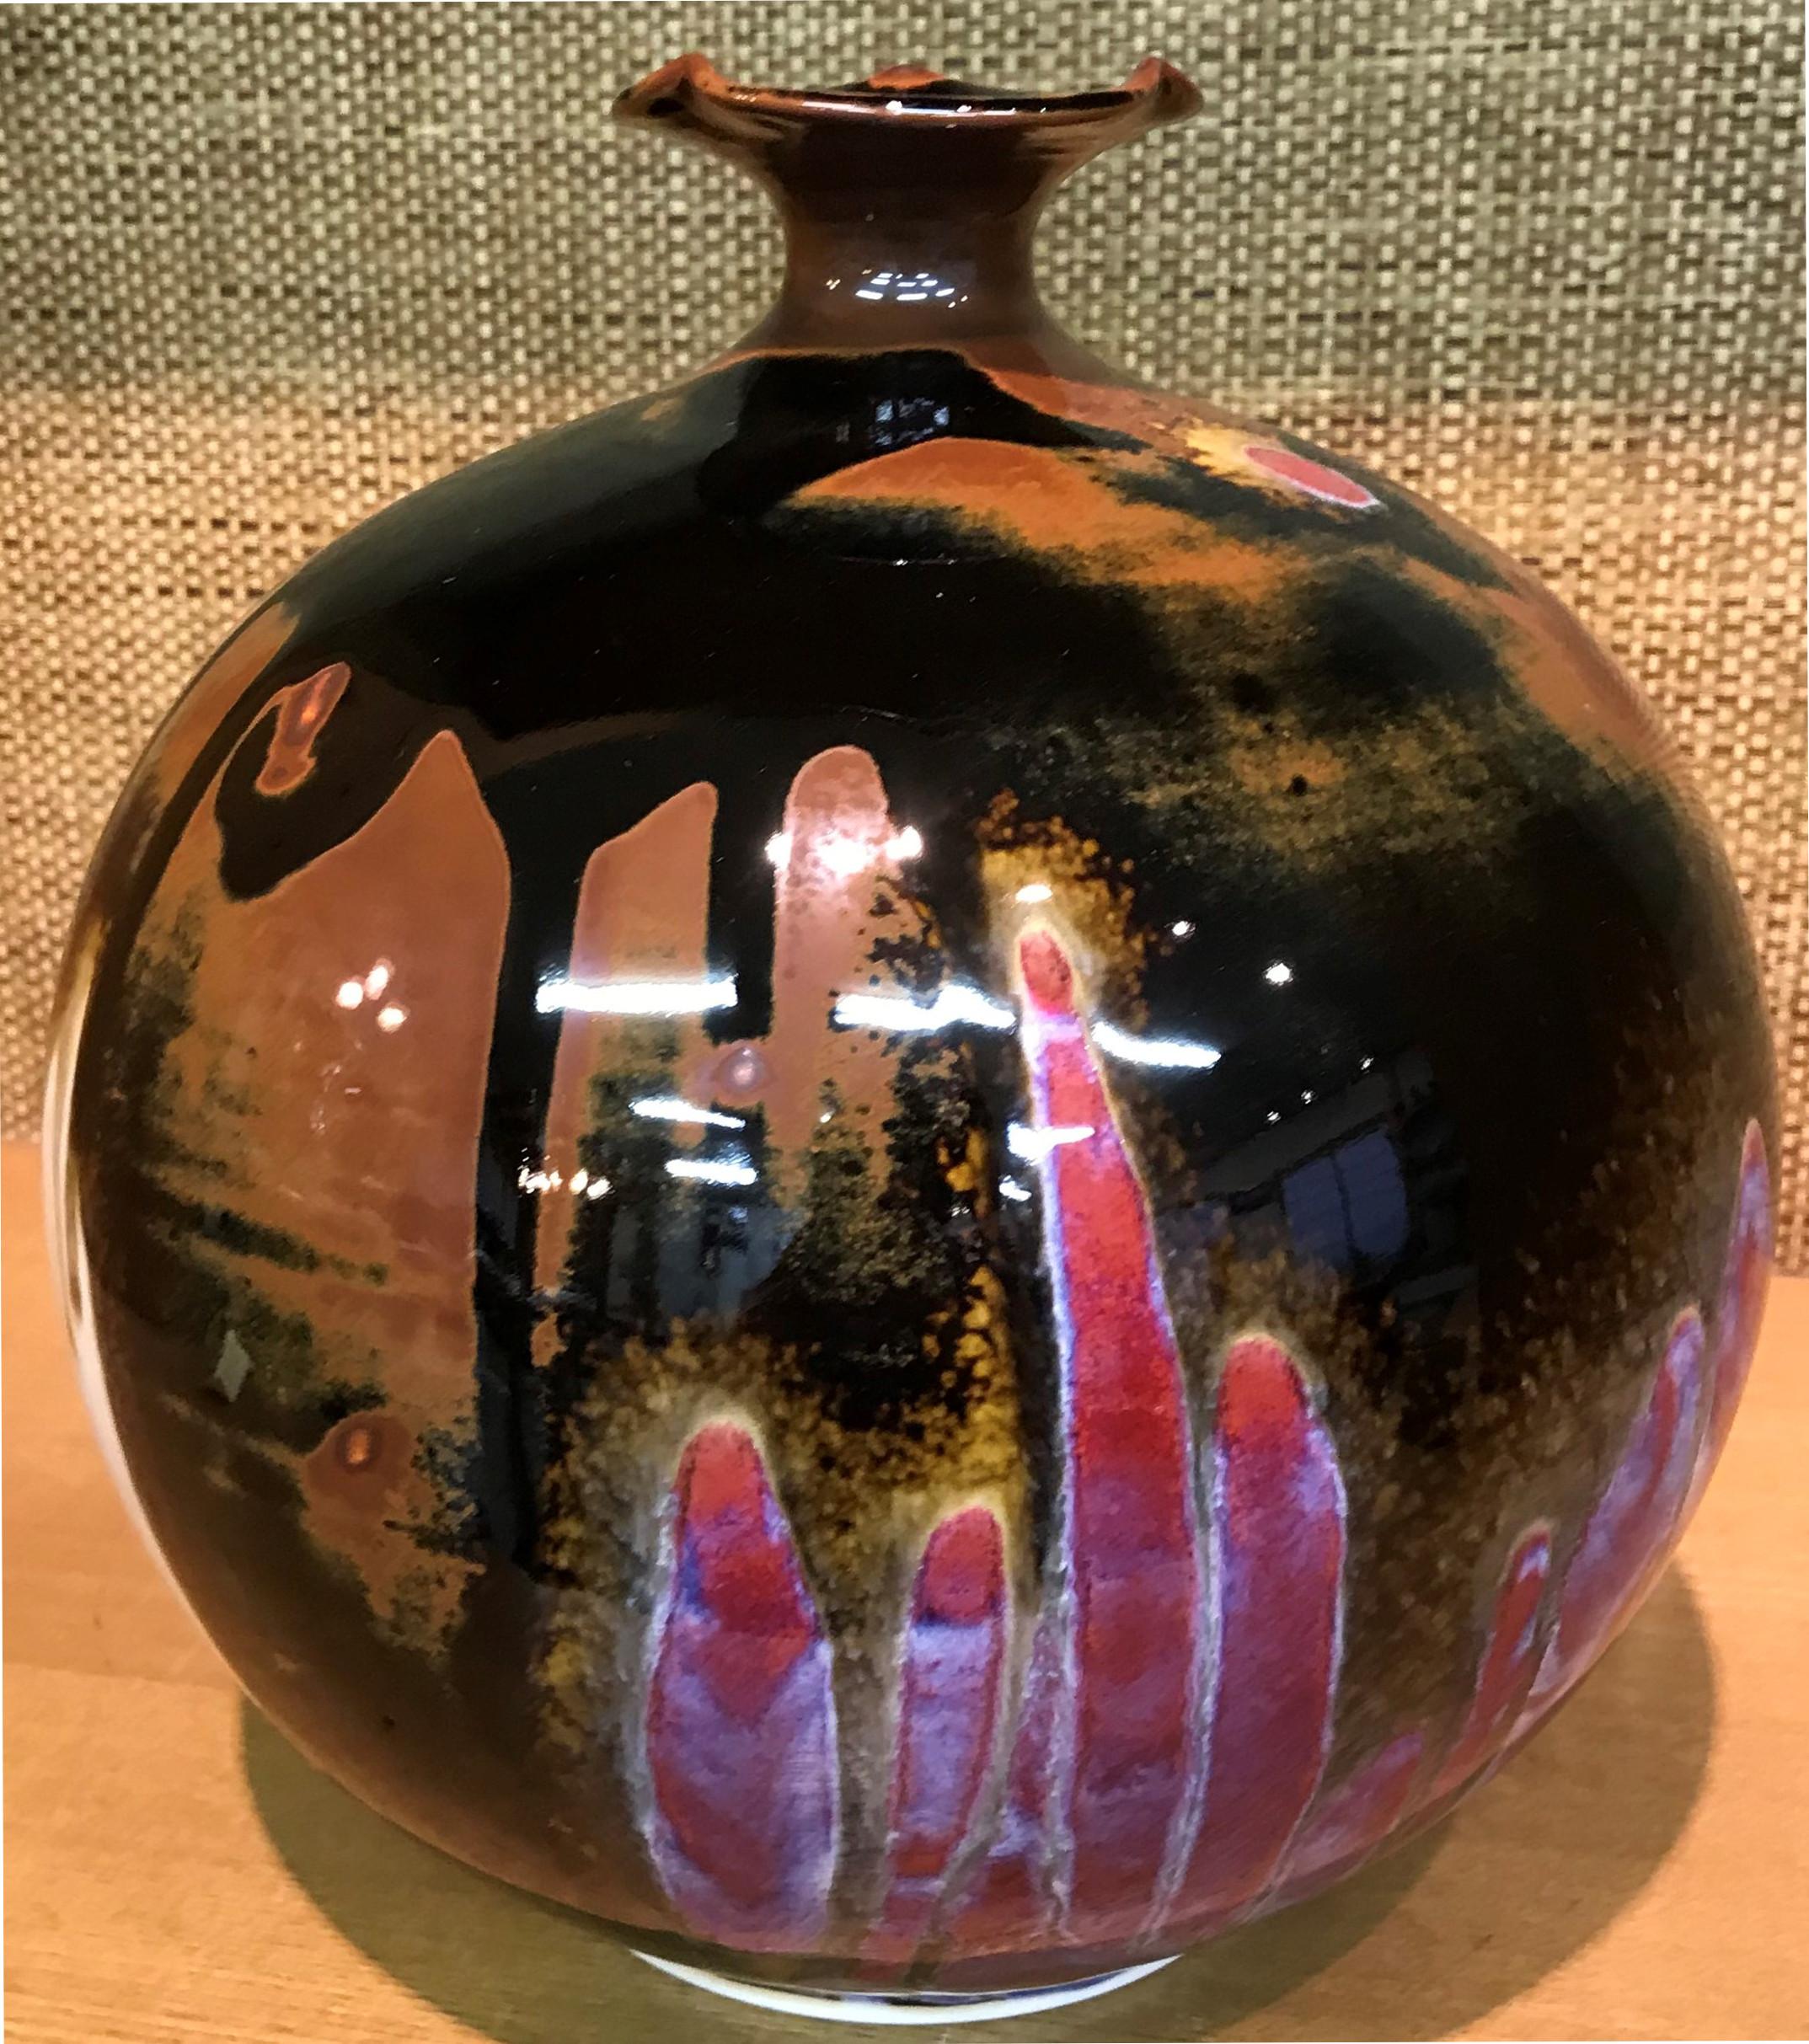 This unique Japanese contemporary hand-glazed decorative porcelain vase features the artist’s signature red, blue and brown colors set against a black background. The creator of this piece is a third generation porcelain artist of the Imari-Arita